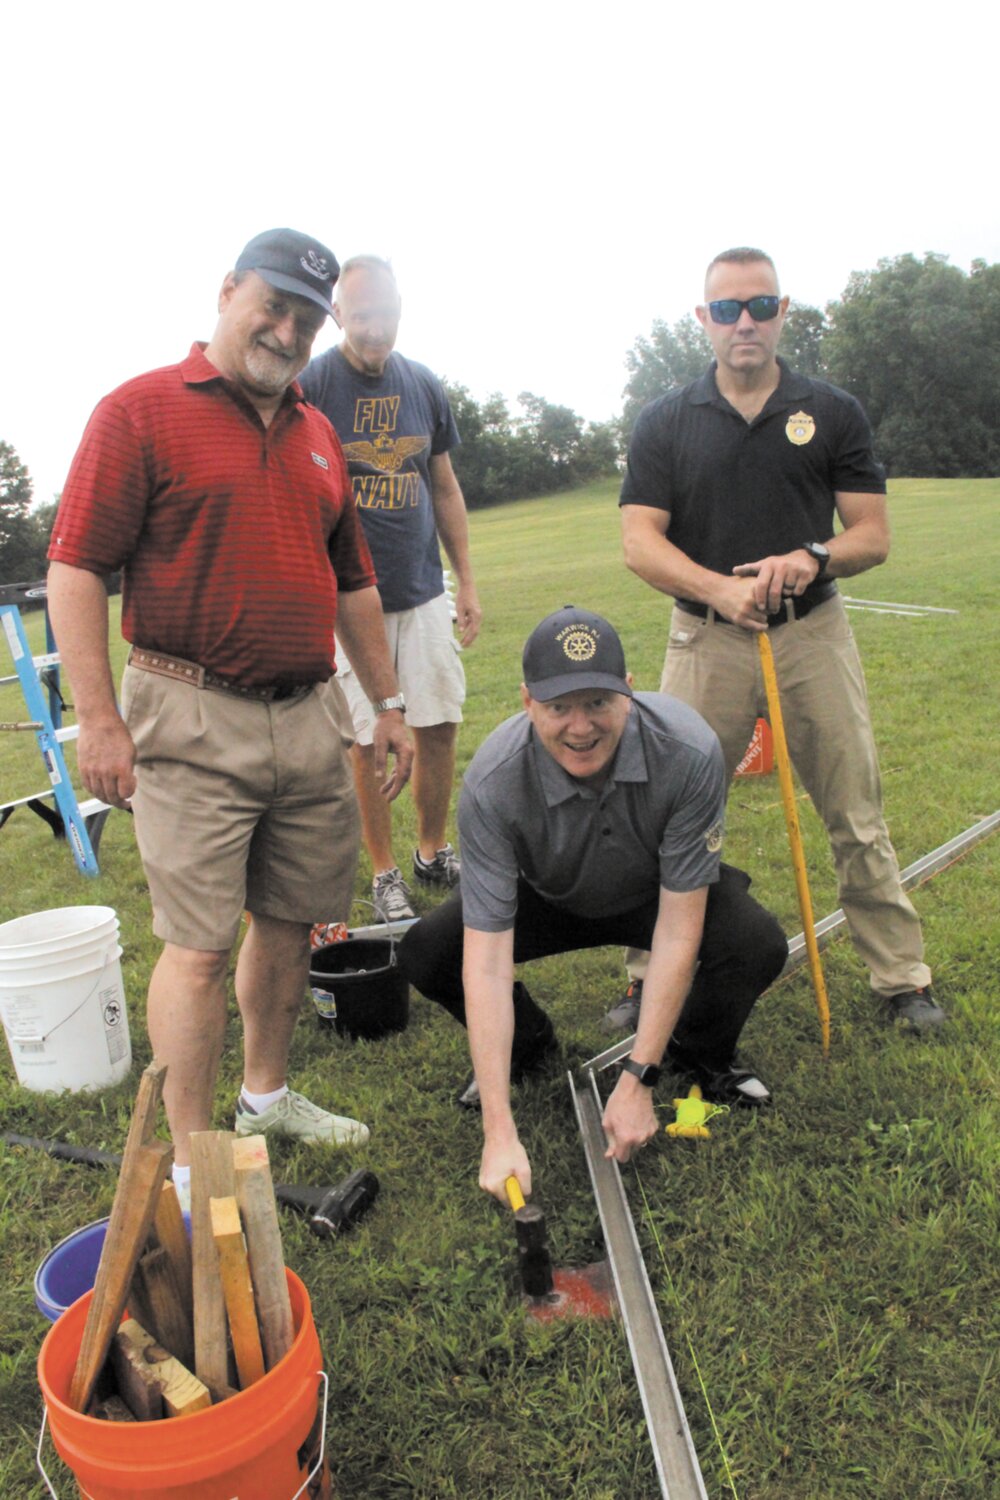 ERECTING THE WALL: Rotarians from across the state helped assemble the wall at Rocky Point Friday morning. Here, Oliver Brady, president of the Warwick Rotary Club, prepares the track for wall sections that Rotarians joining  him will be lifted into place . (Warwick Beacon photos)